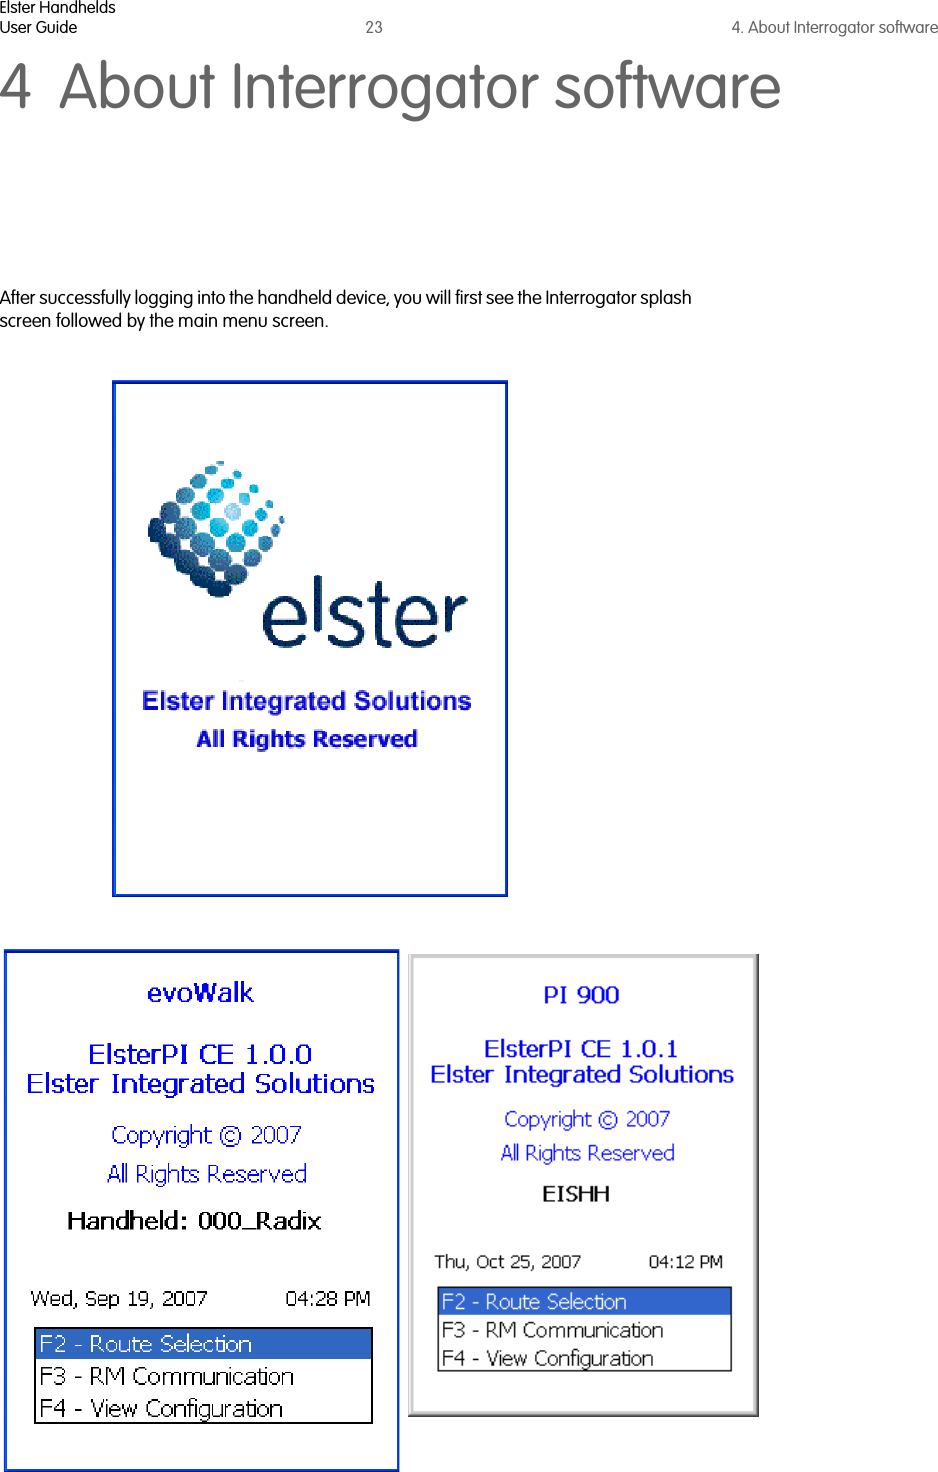 Elster HandheldsUser Guide 23 4. About Interrogator software4 About Interrogator softwareAfter successfully logging into the handheld device, you will first see the Interrogator splash screen followed by the main menu screen.   